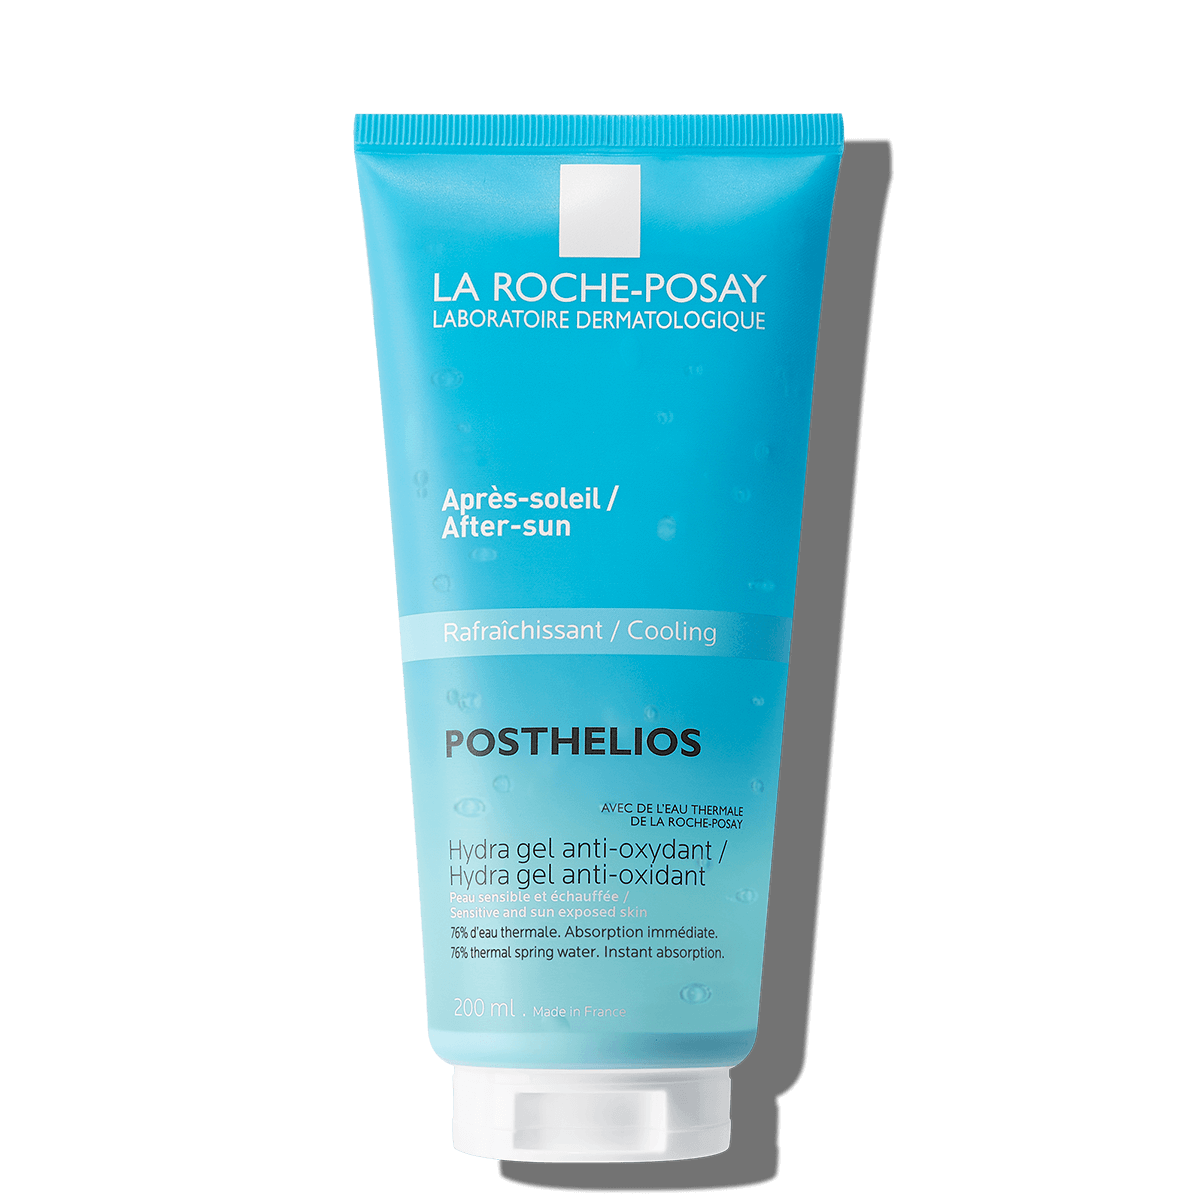 La Roche Posay ProductPage After Sun Posthelios Hydragel 200ml 3337875